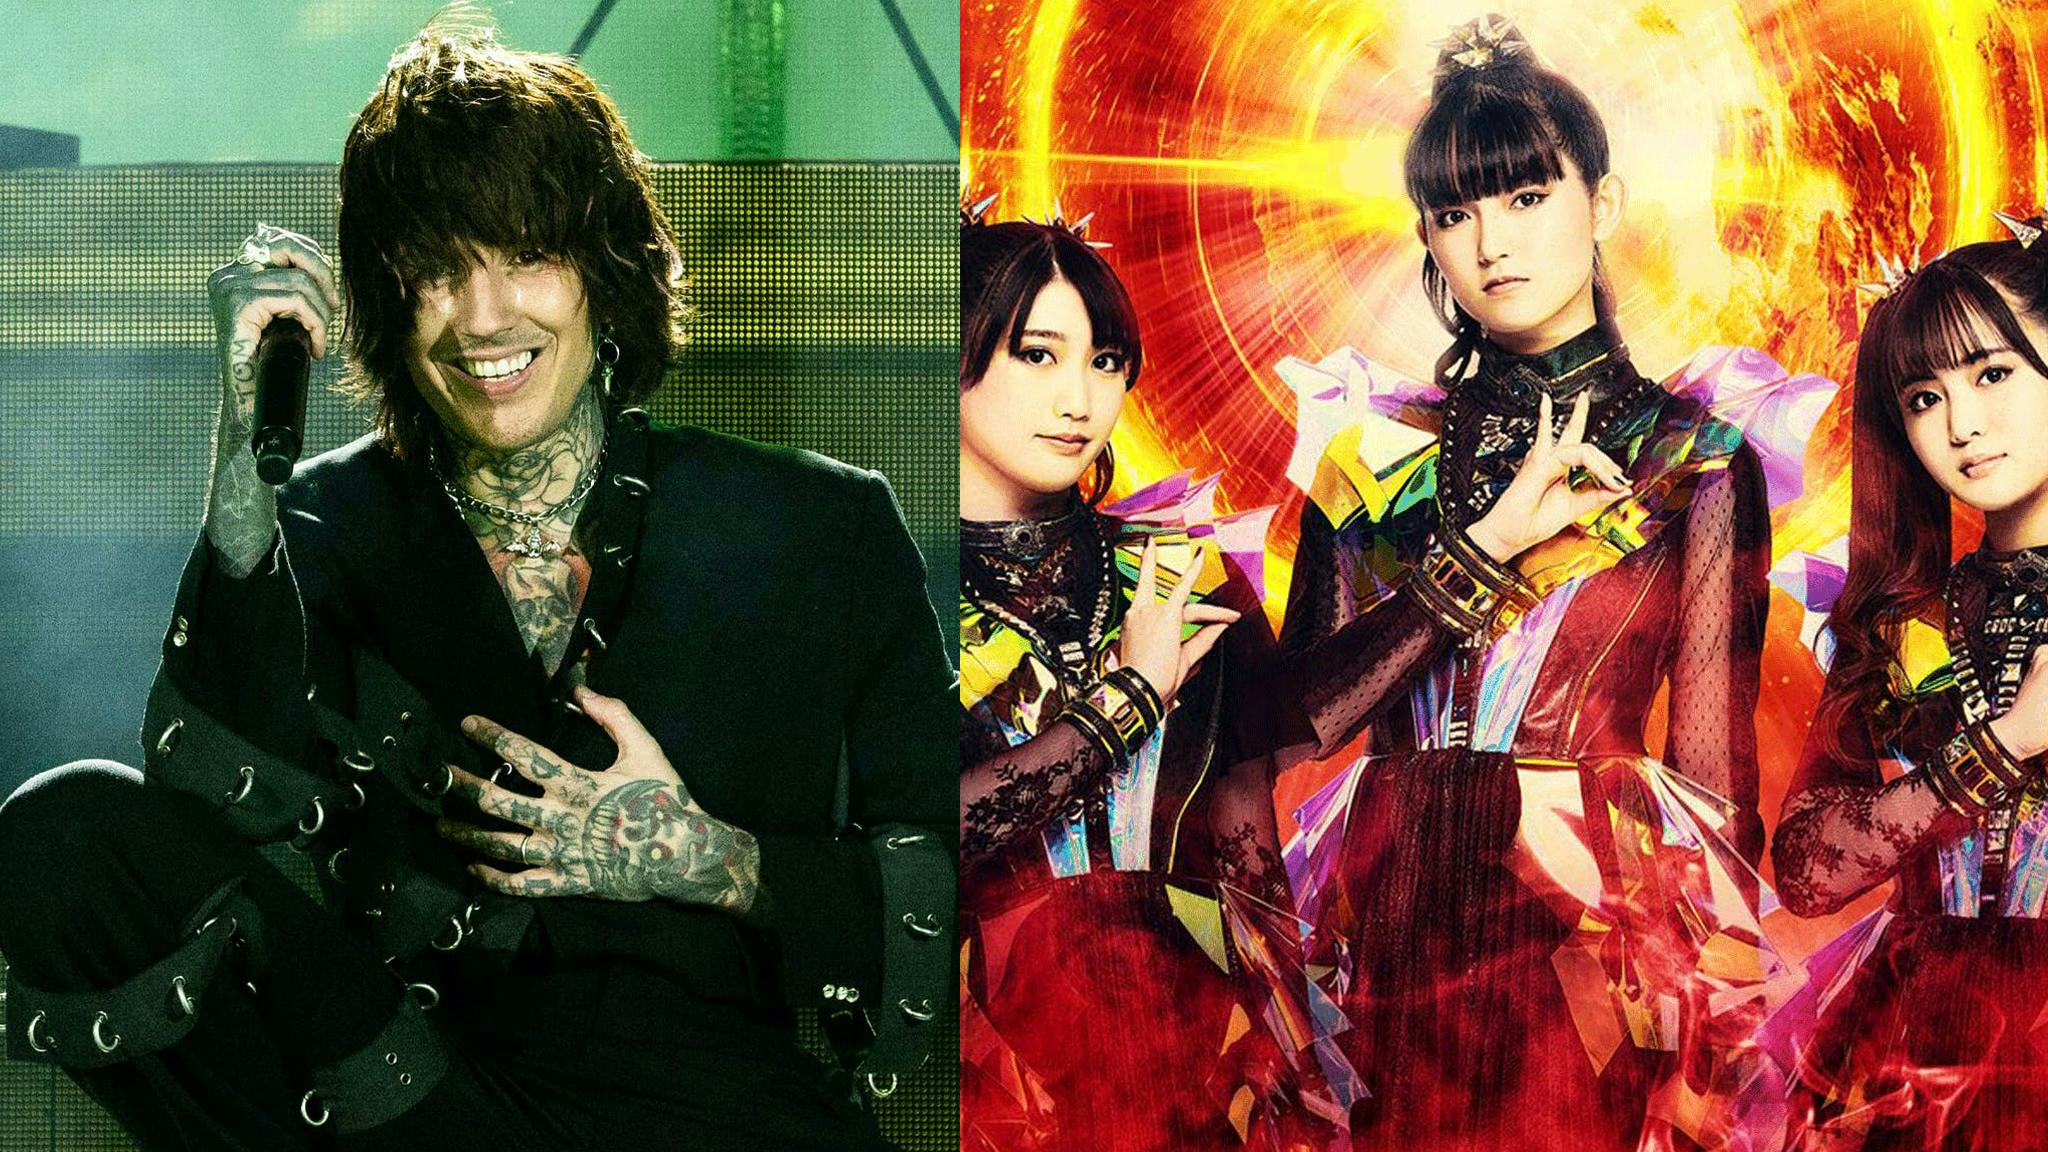 Watch Bring Me The Horizon and BABYMETAL perform Kingslayer in Japan